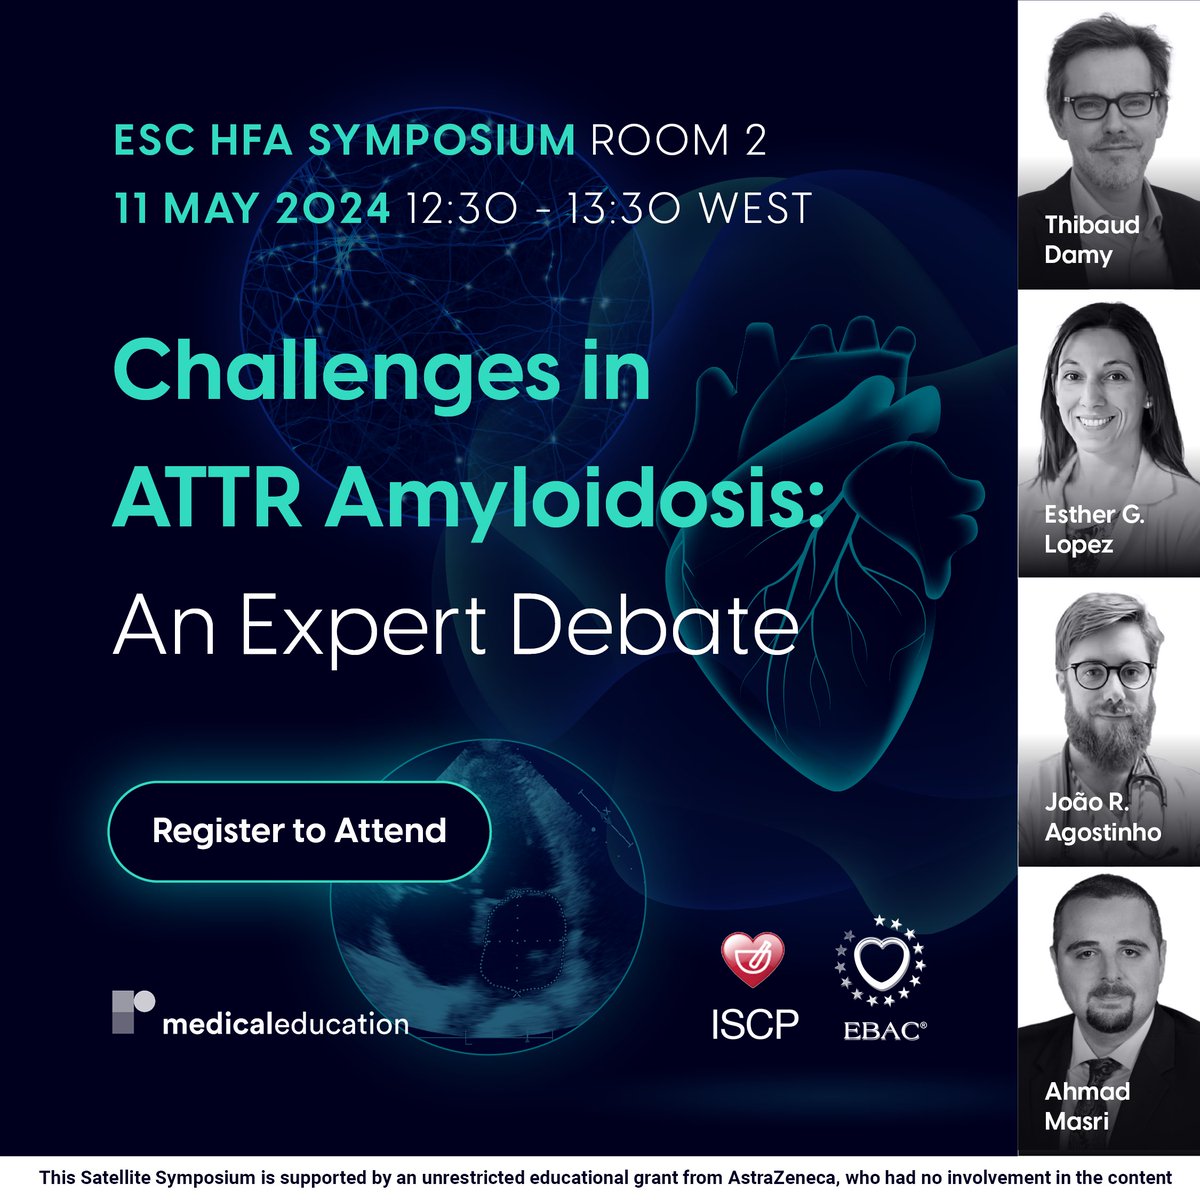 Attending ESC HFA Congress 2024 this weekend? Don't miss out on this symposium on the challenges in ATTR Amyloidosis - tinyurl.com/492c87e6 This satellite symposium is supported by an unrestricted educational grant from AstraZeneca who had no involvement in the content.